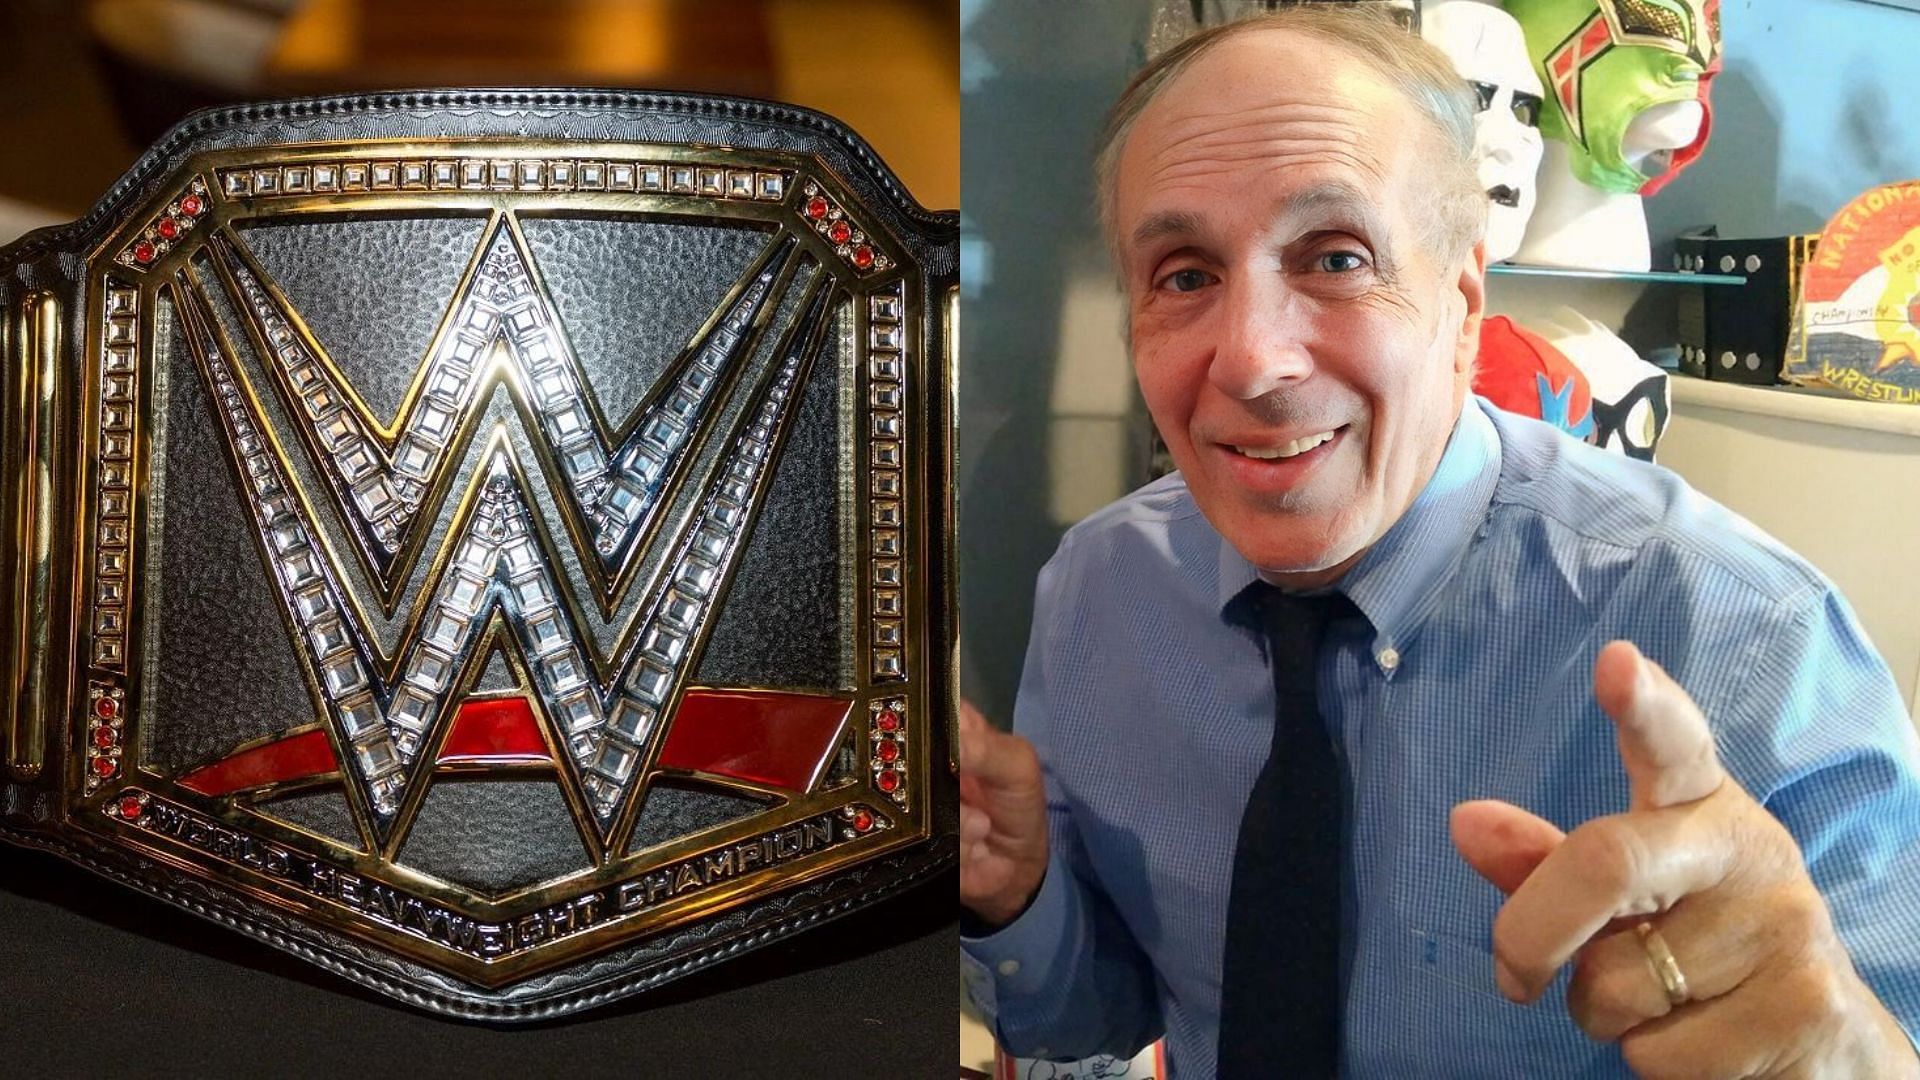 Bill Apter shared some interesting thoughts this week